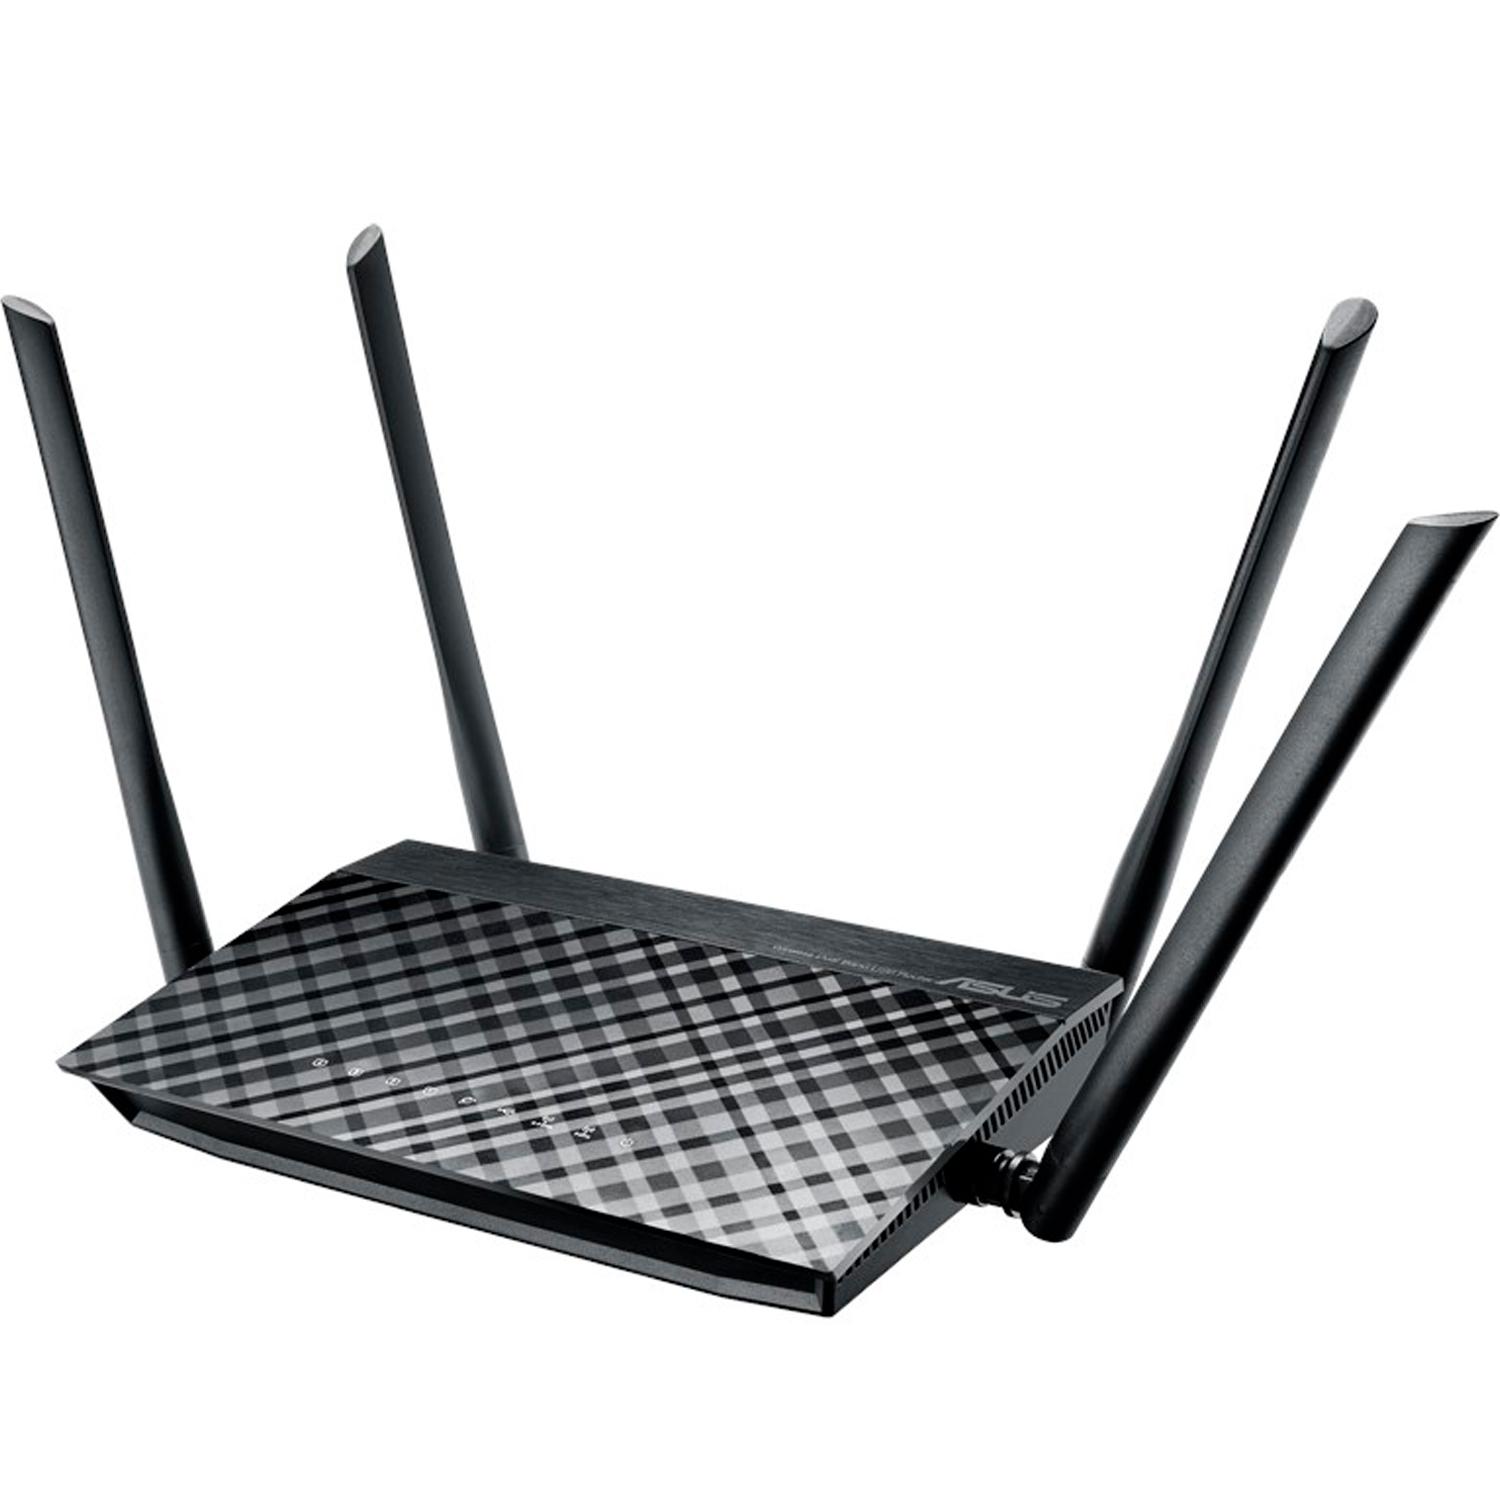 Router Inalambrico ASUS RT-AC1200 V2 Dual Band 802.11AC 867 Mbps